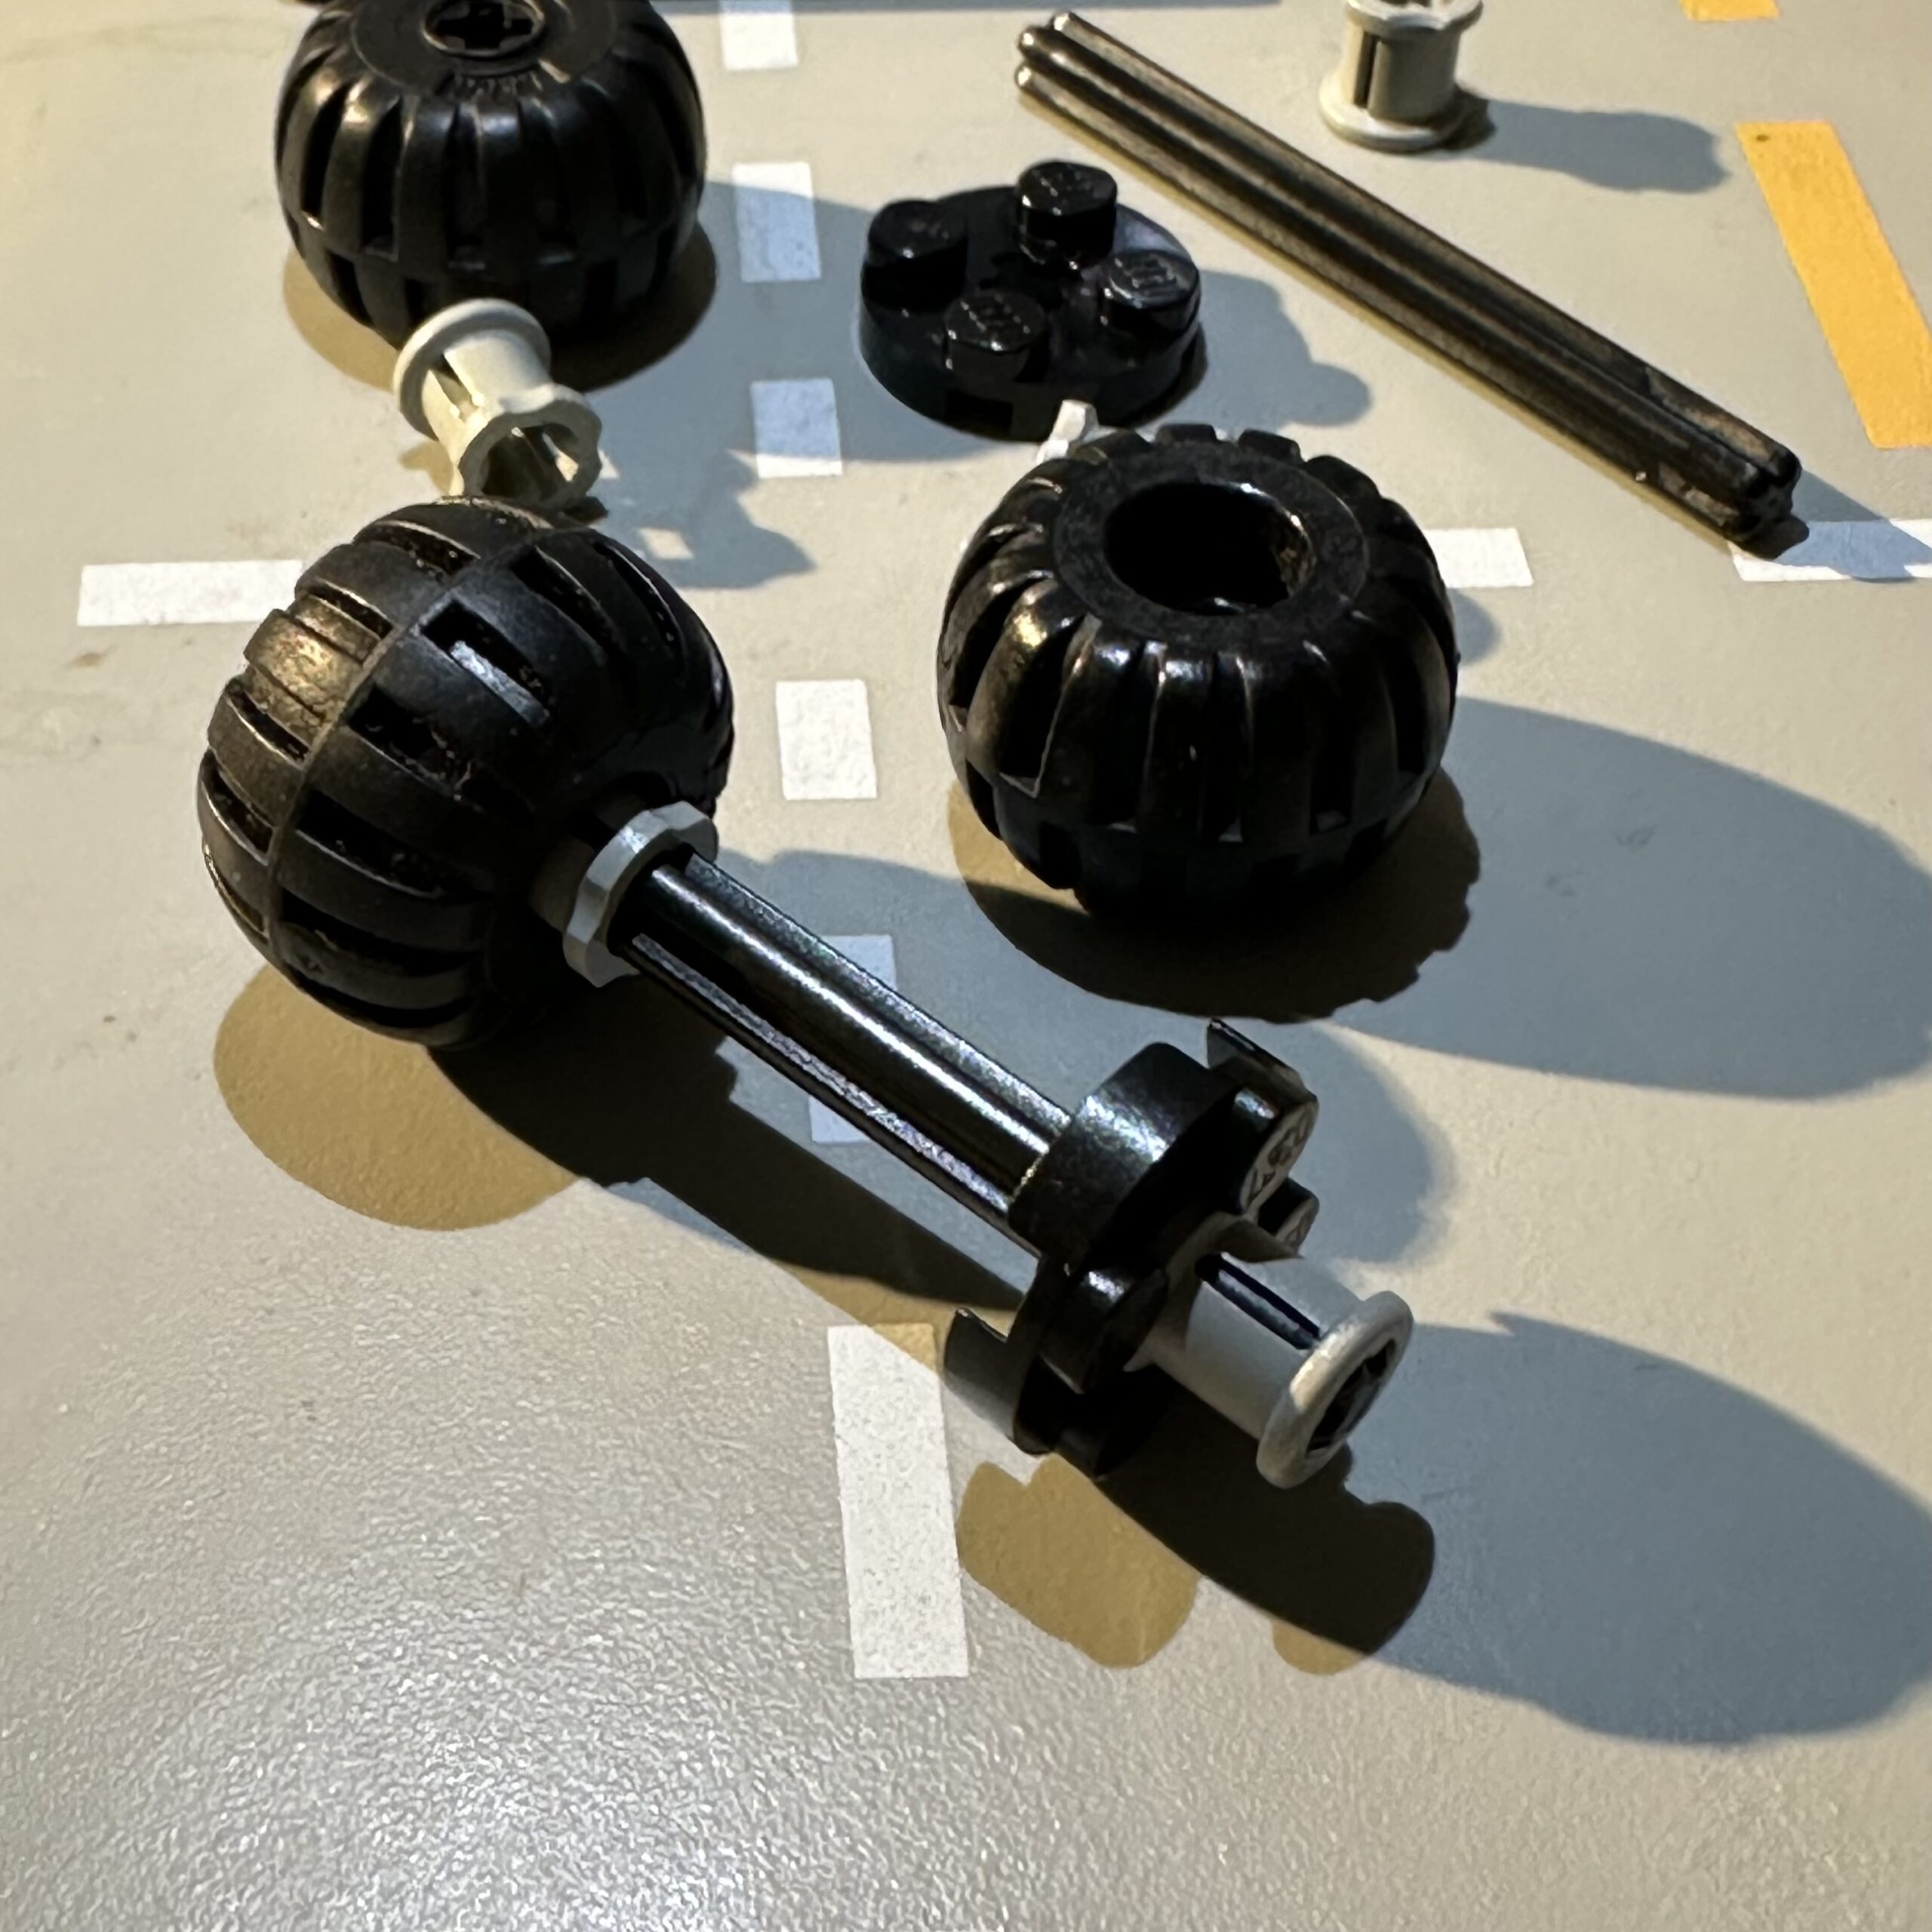 Collection of LEGO parts including a black rubber balloon tire piece connected to a black technic axle and secured with a gray bushing.